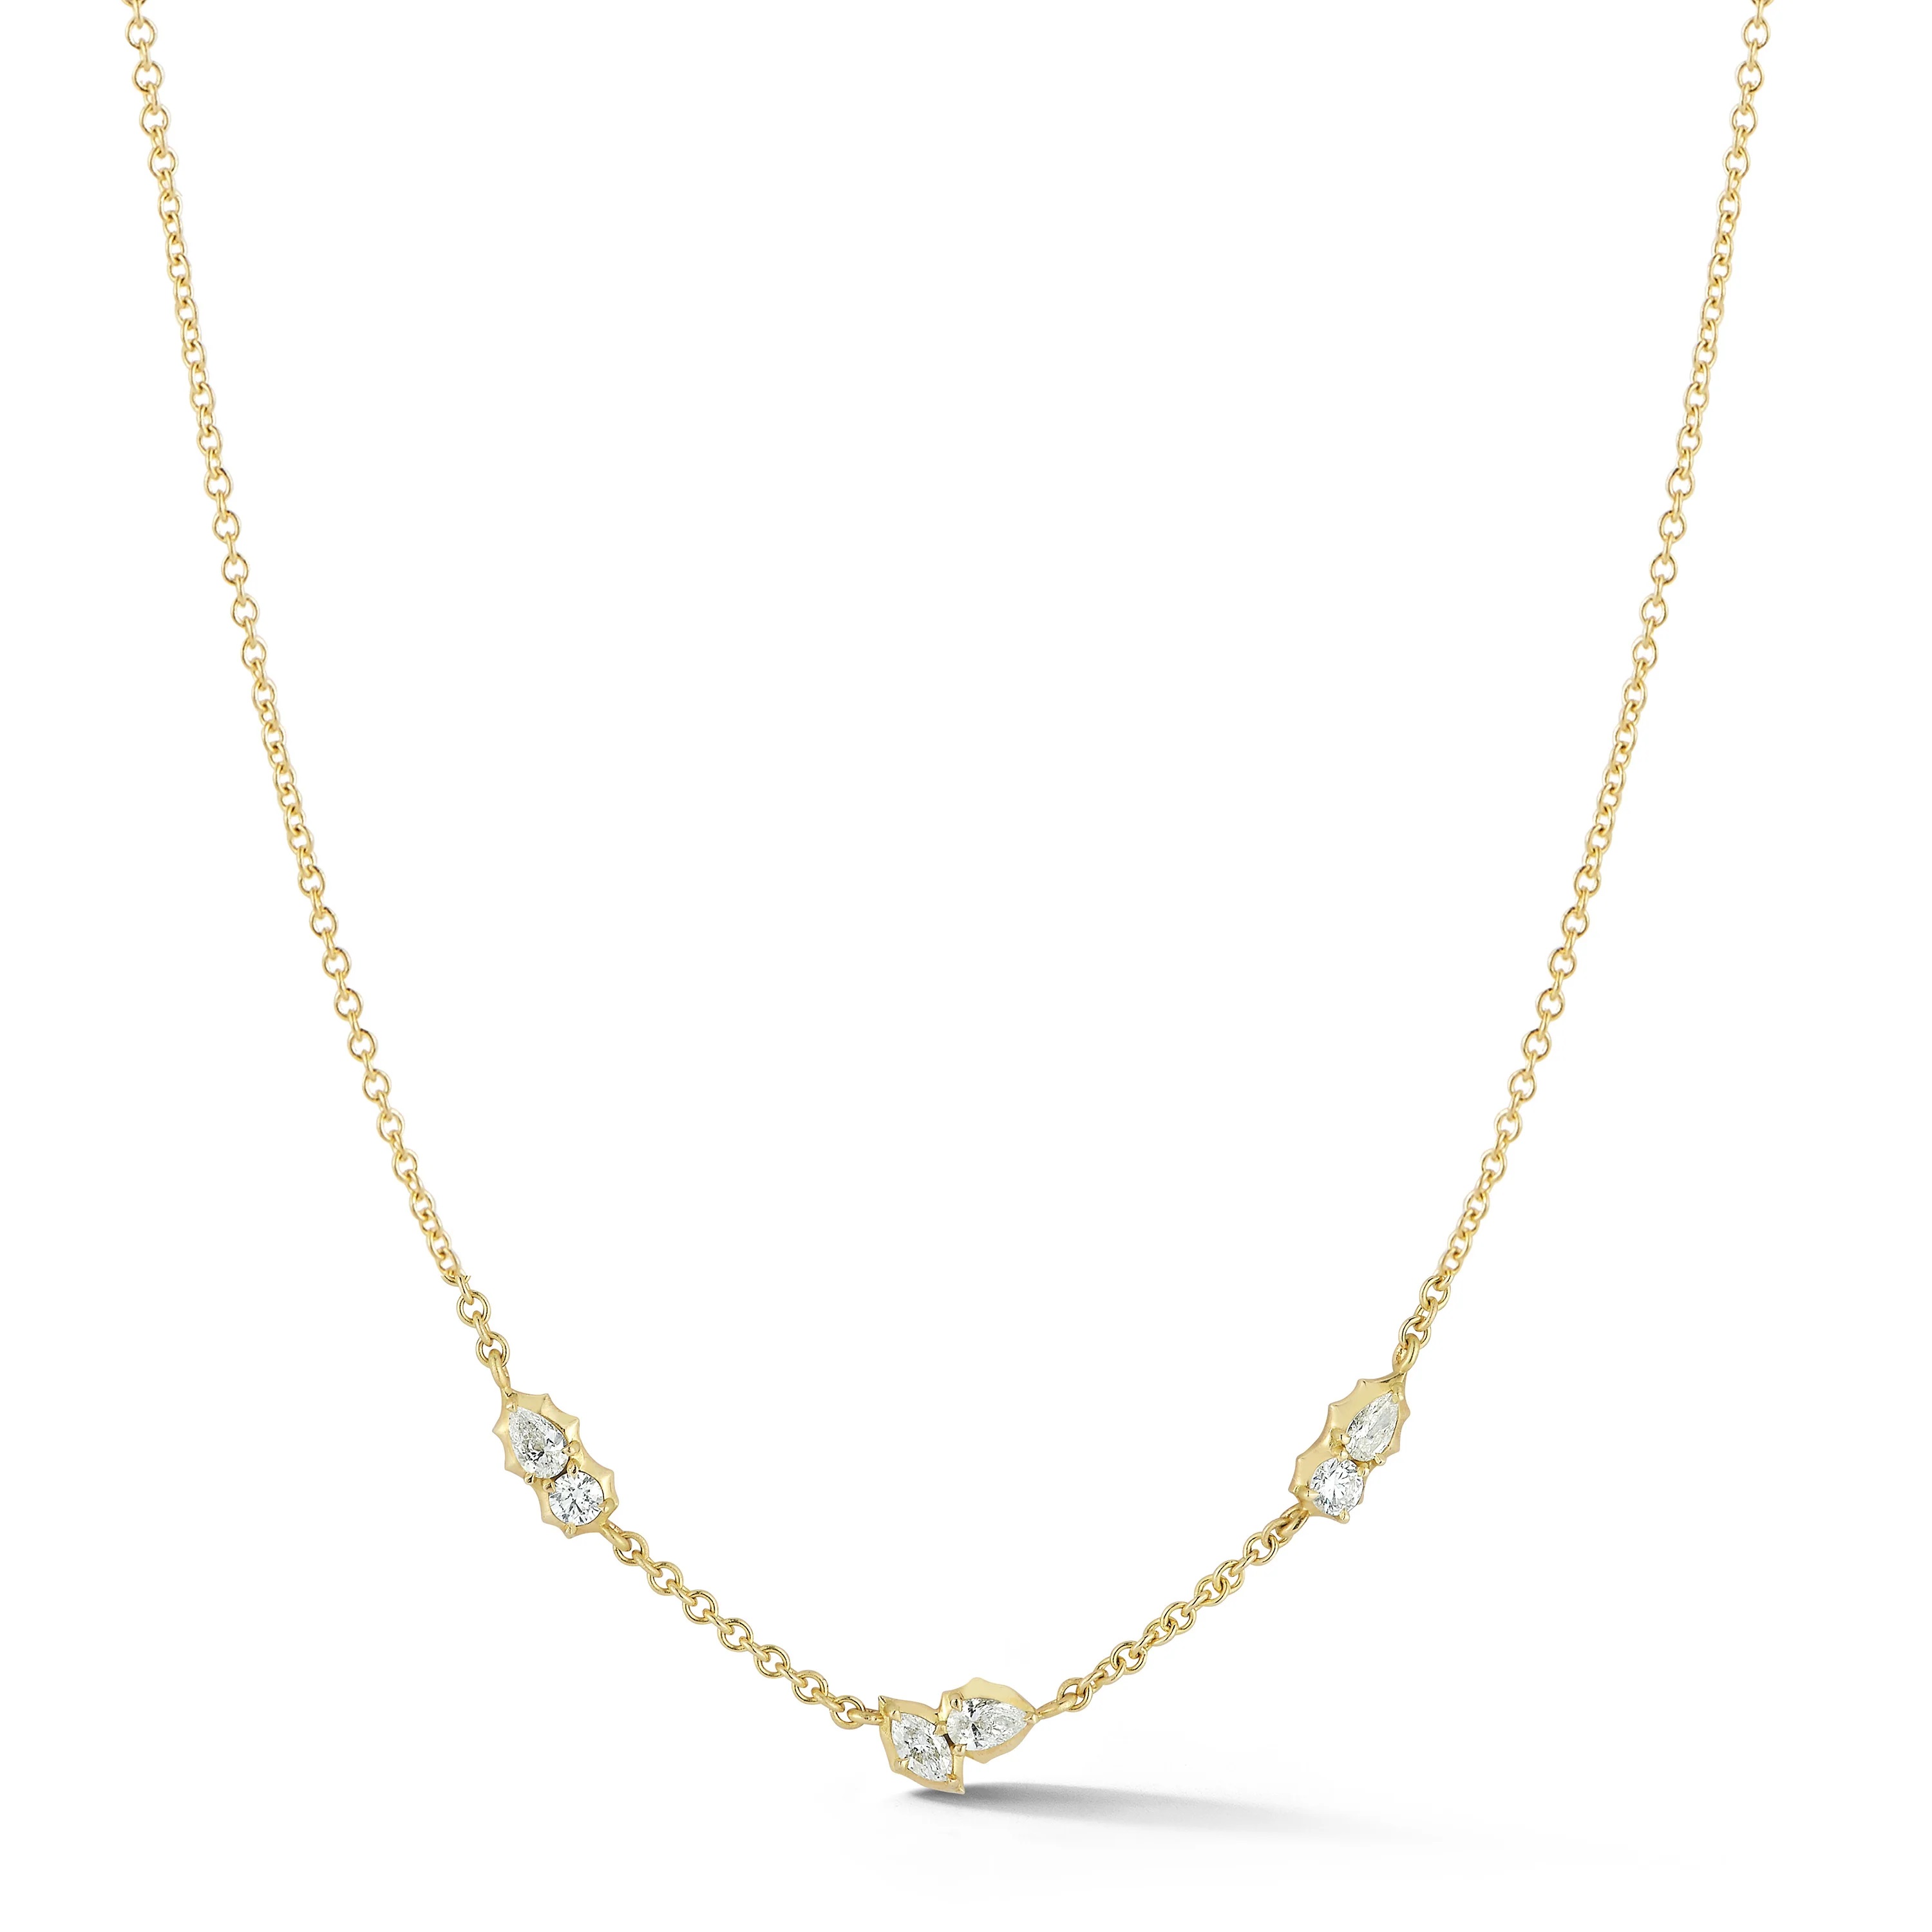 Jade Trau 18kt Yellow Gold and Diamond Posey Station Necklace